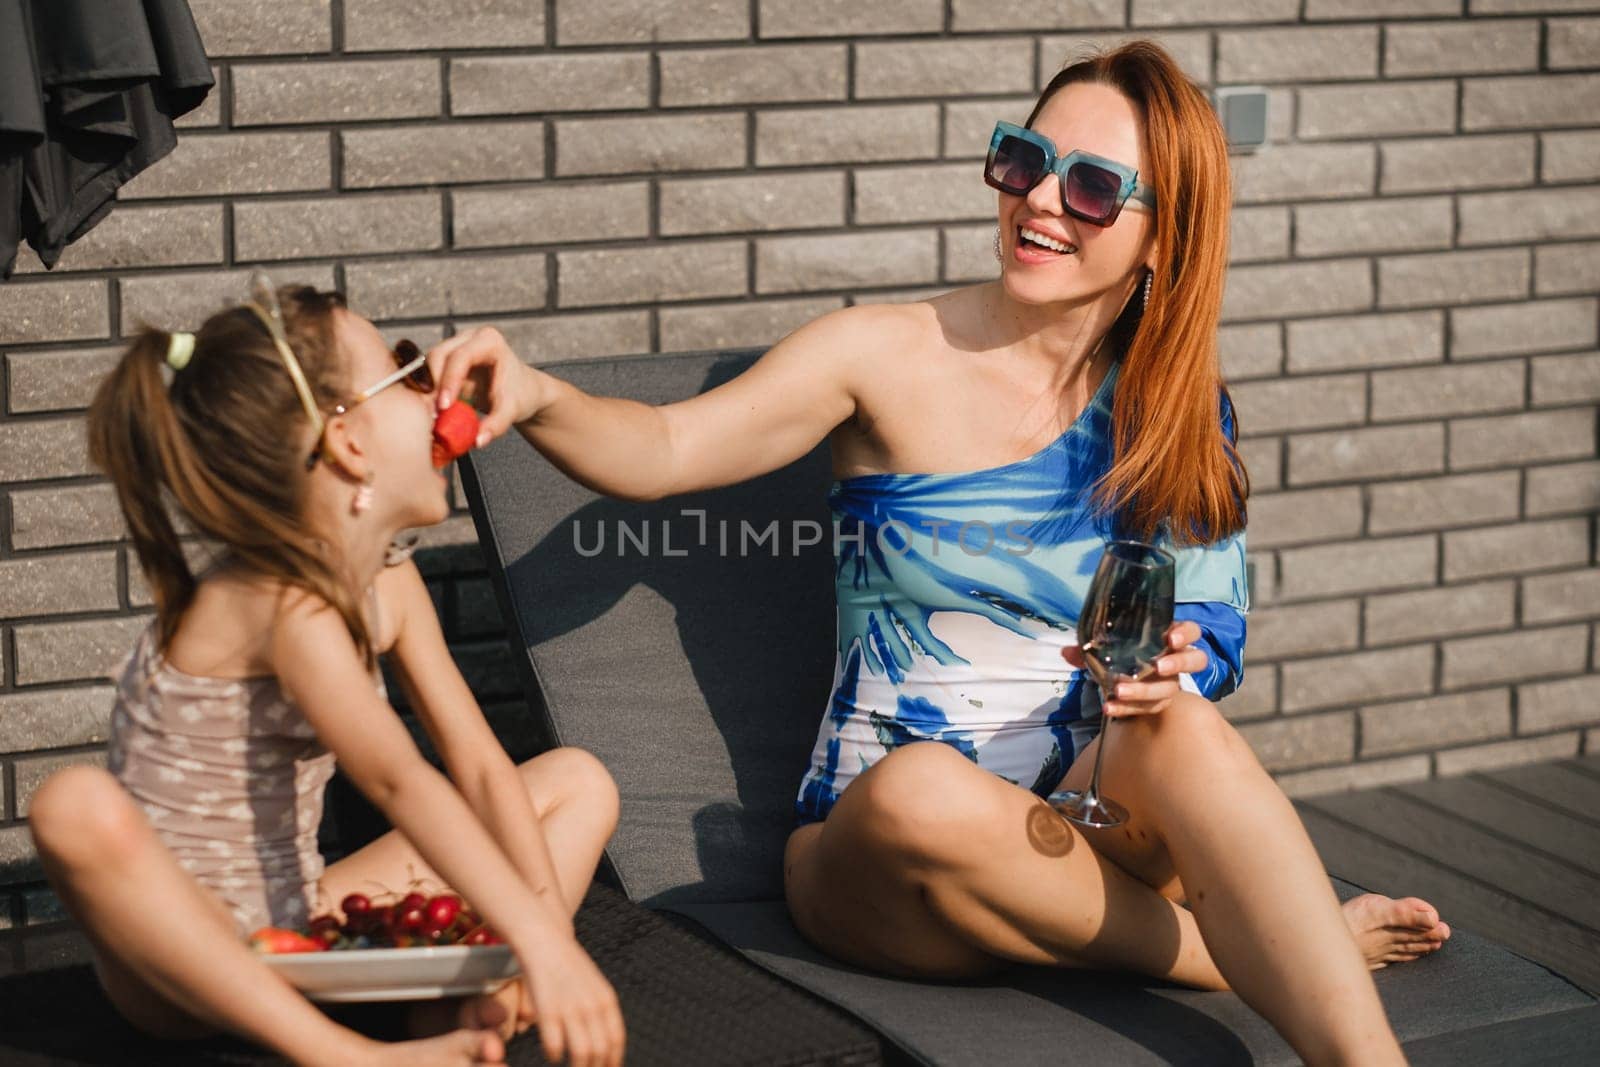 A happy family in swimsuits sunbathes on their terrace in summer. Mom feeds her daughter strawberries.